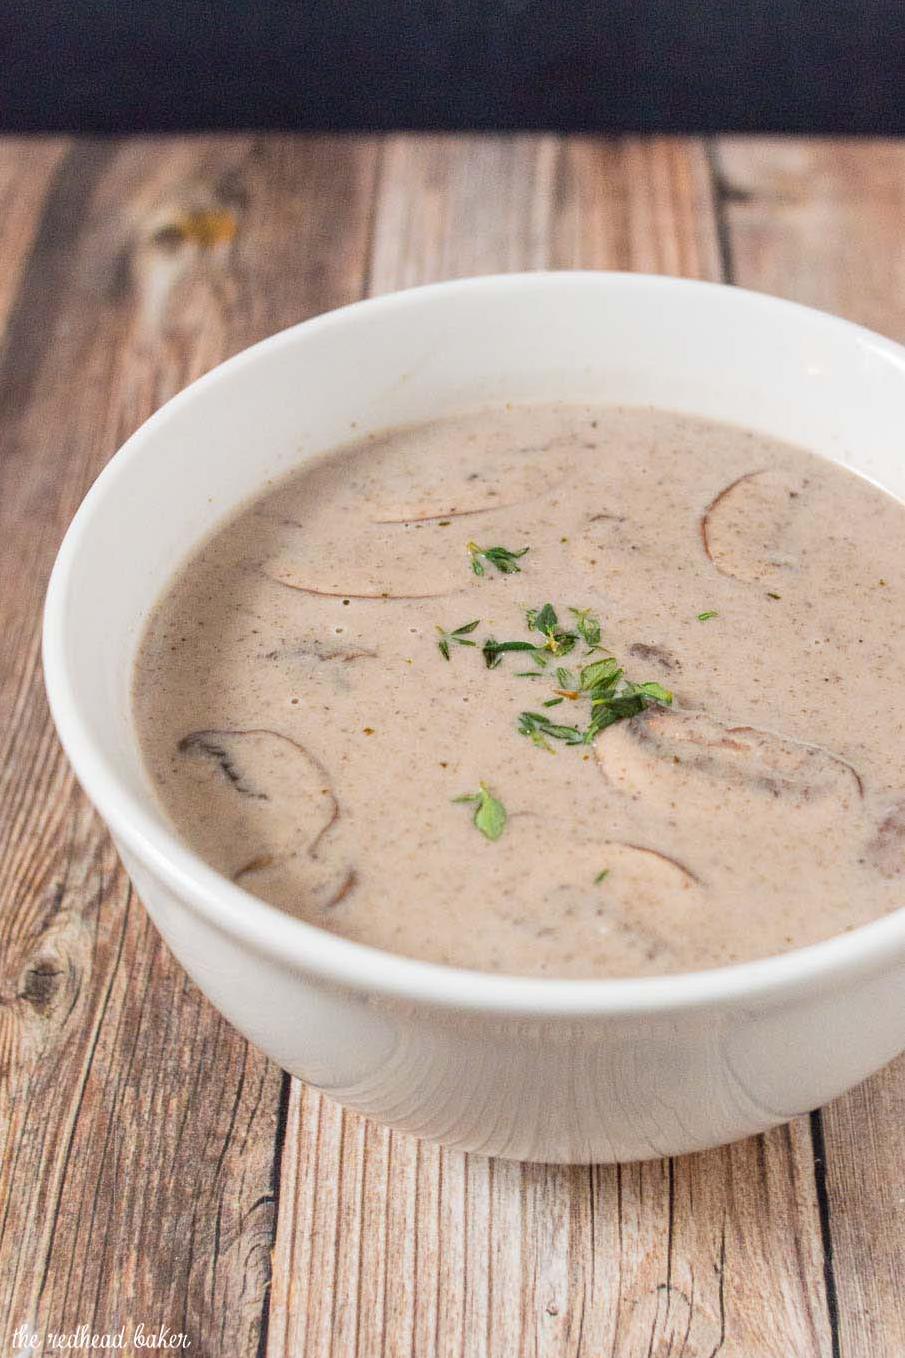  A creamy soup that tastes like a glass of port in every spoonful